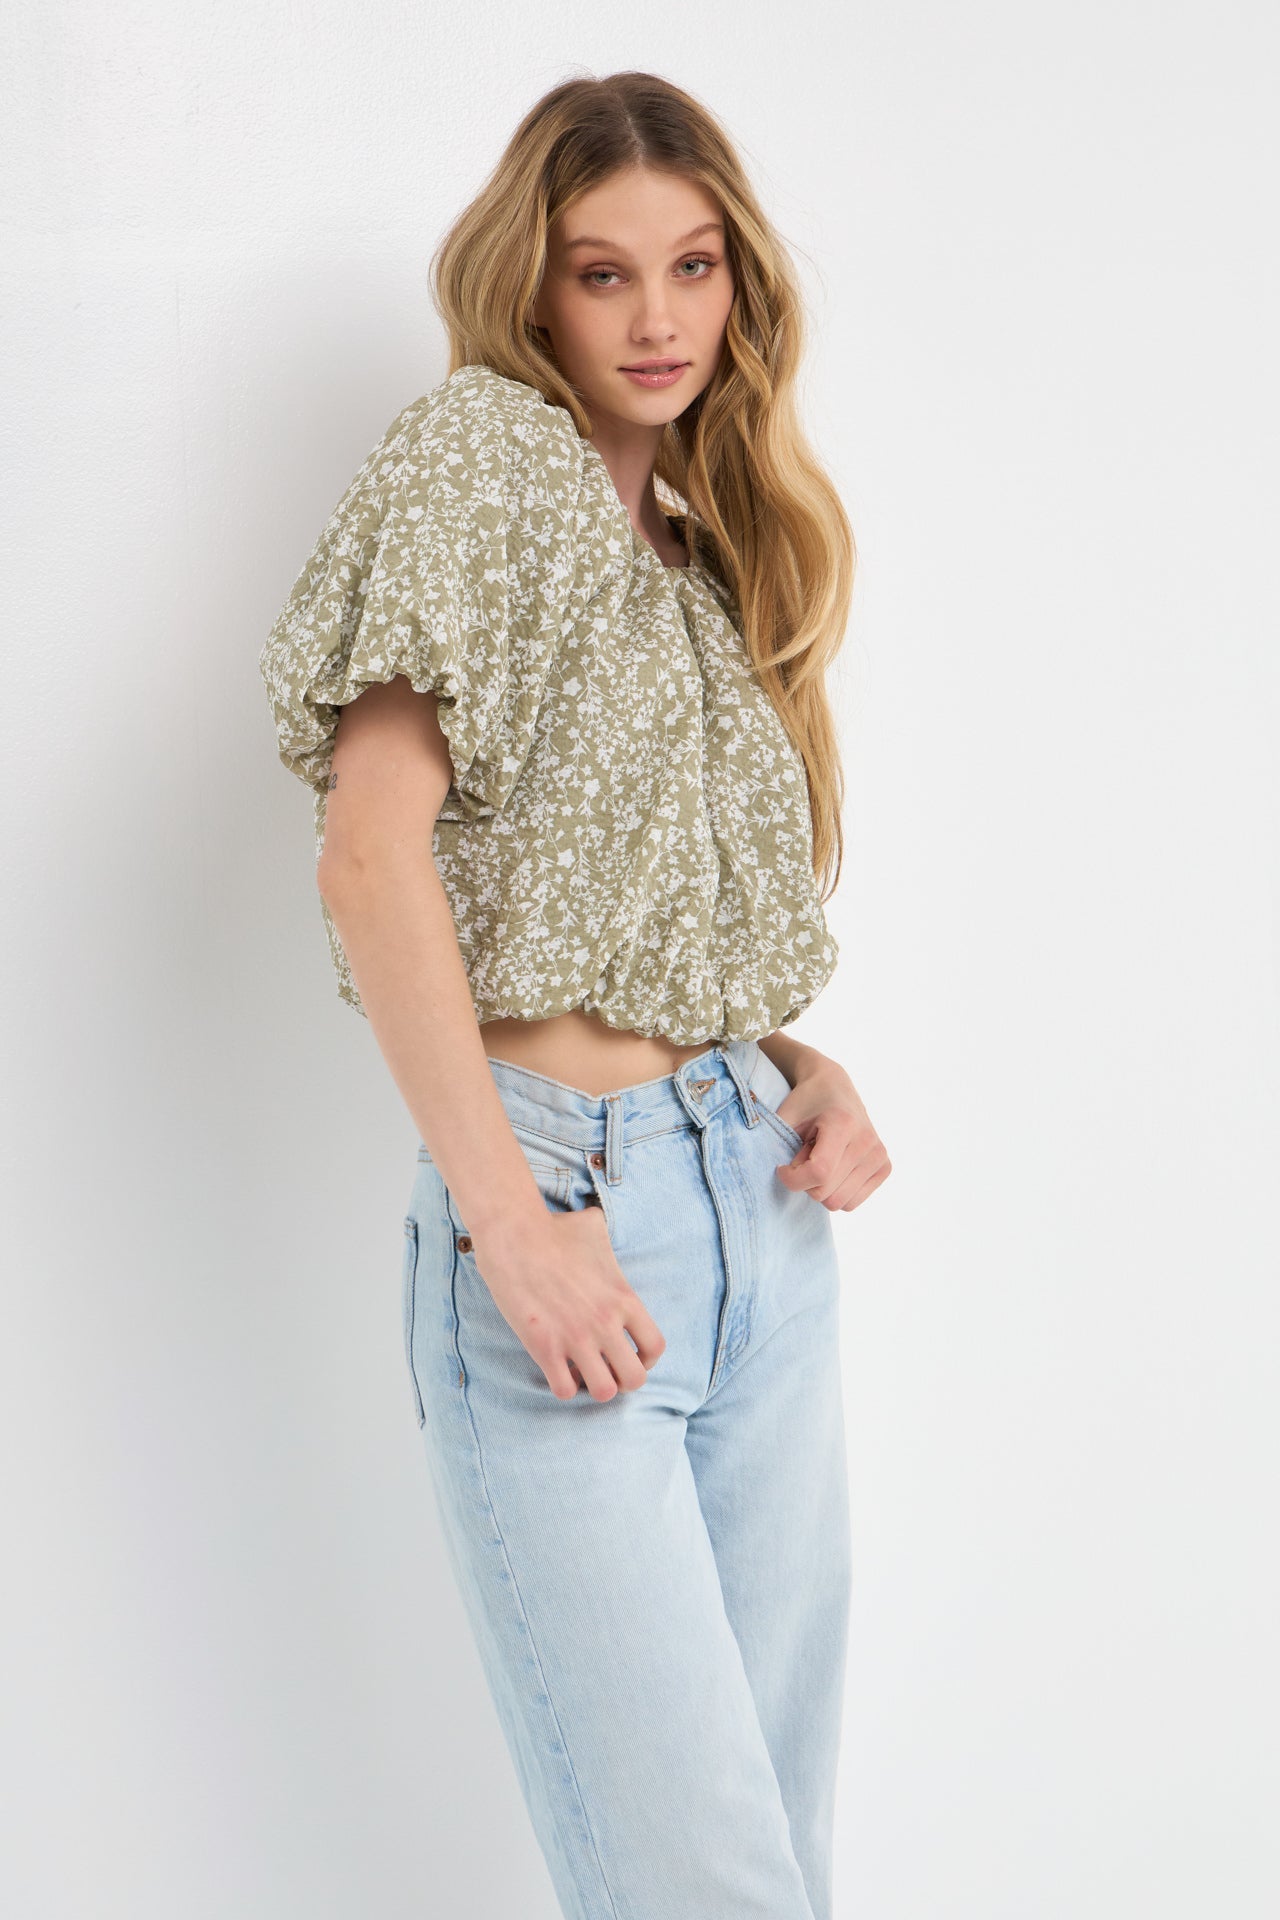 FREE THE ROSES - Raglan Blouson Cropped Top - TOPS available at Objectrare